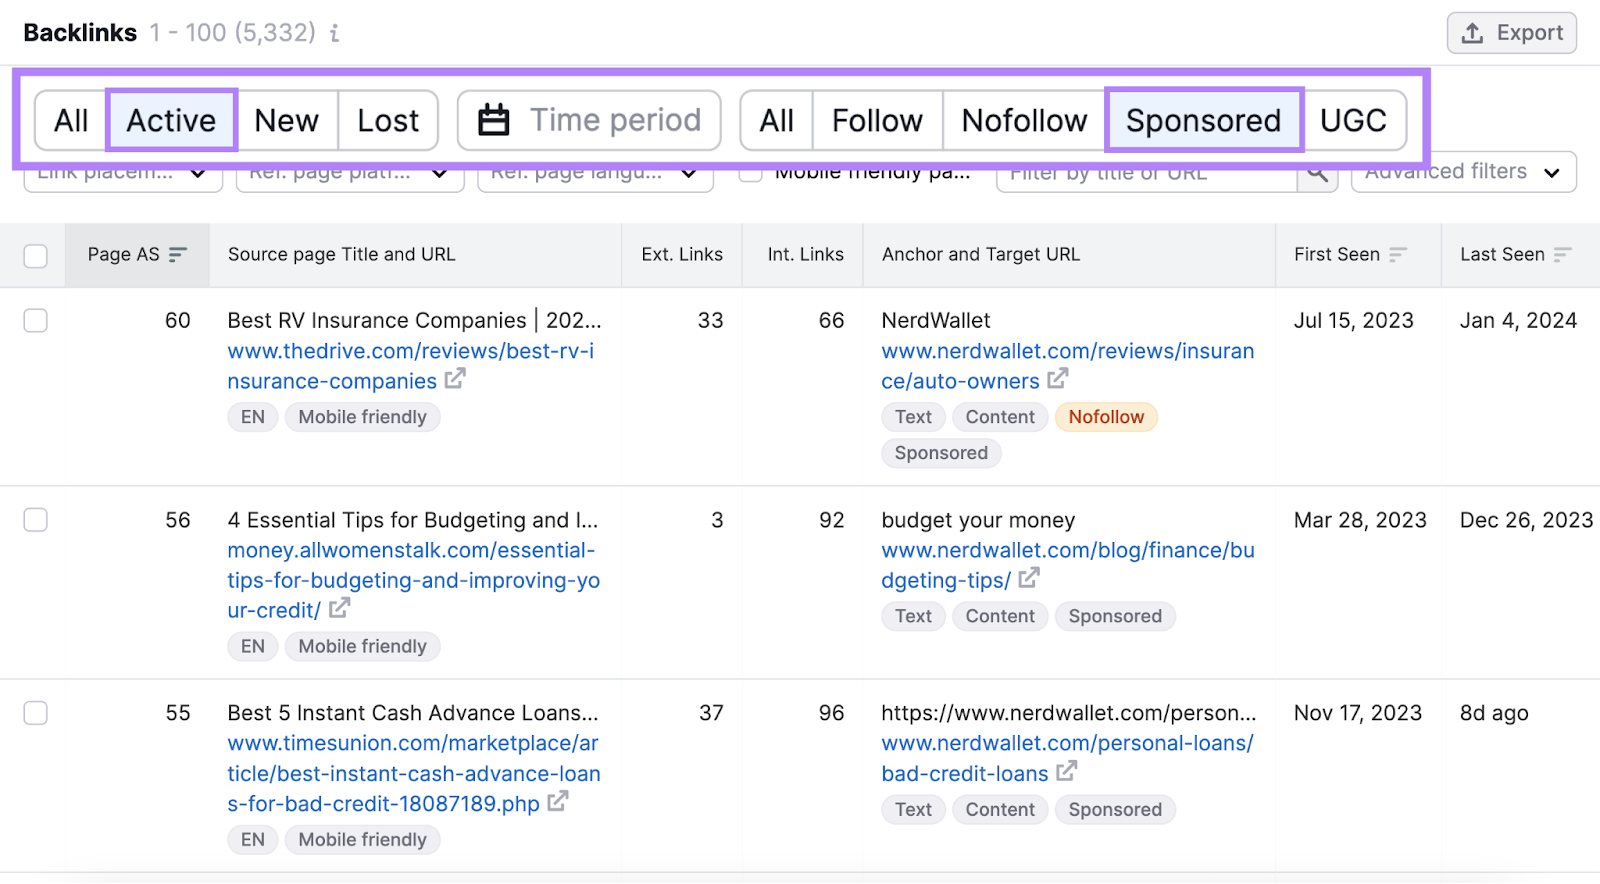 "Active," and "Sponsored" tabs selected nether  "Backlinks" report